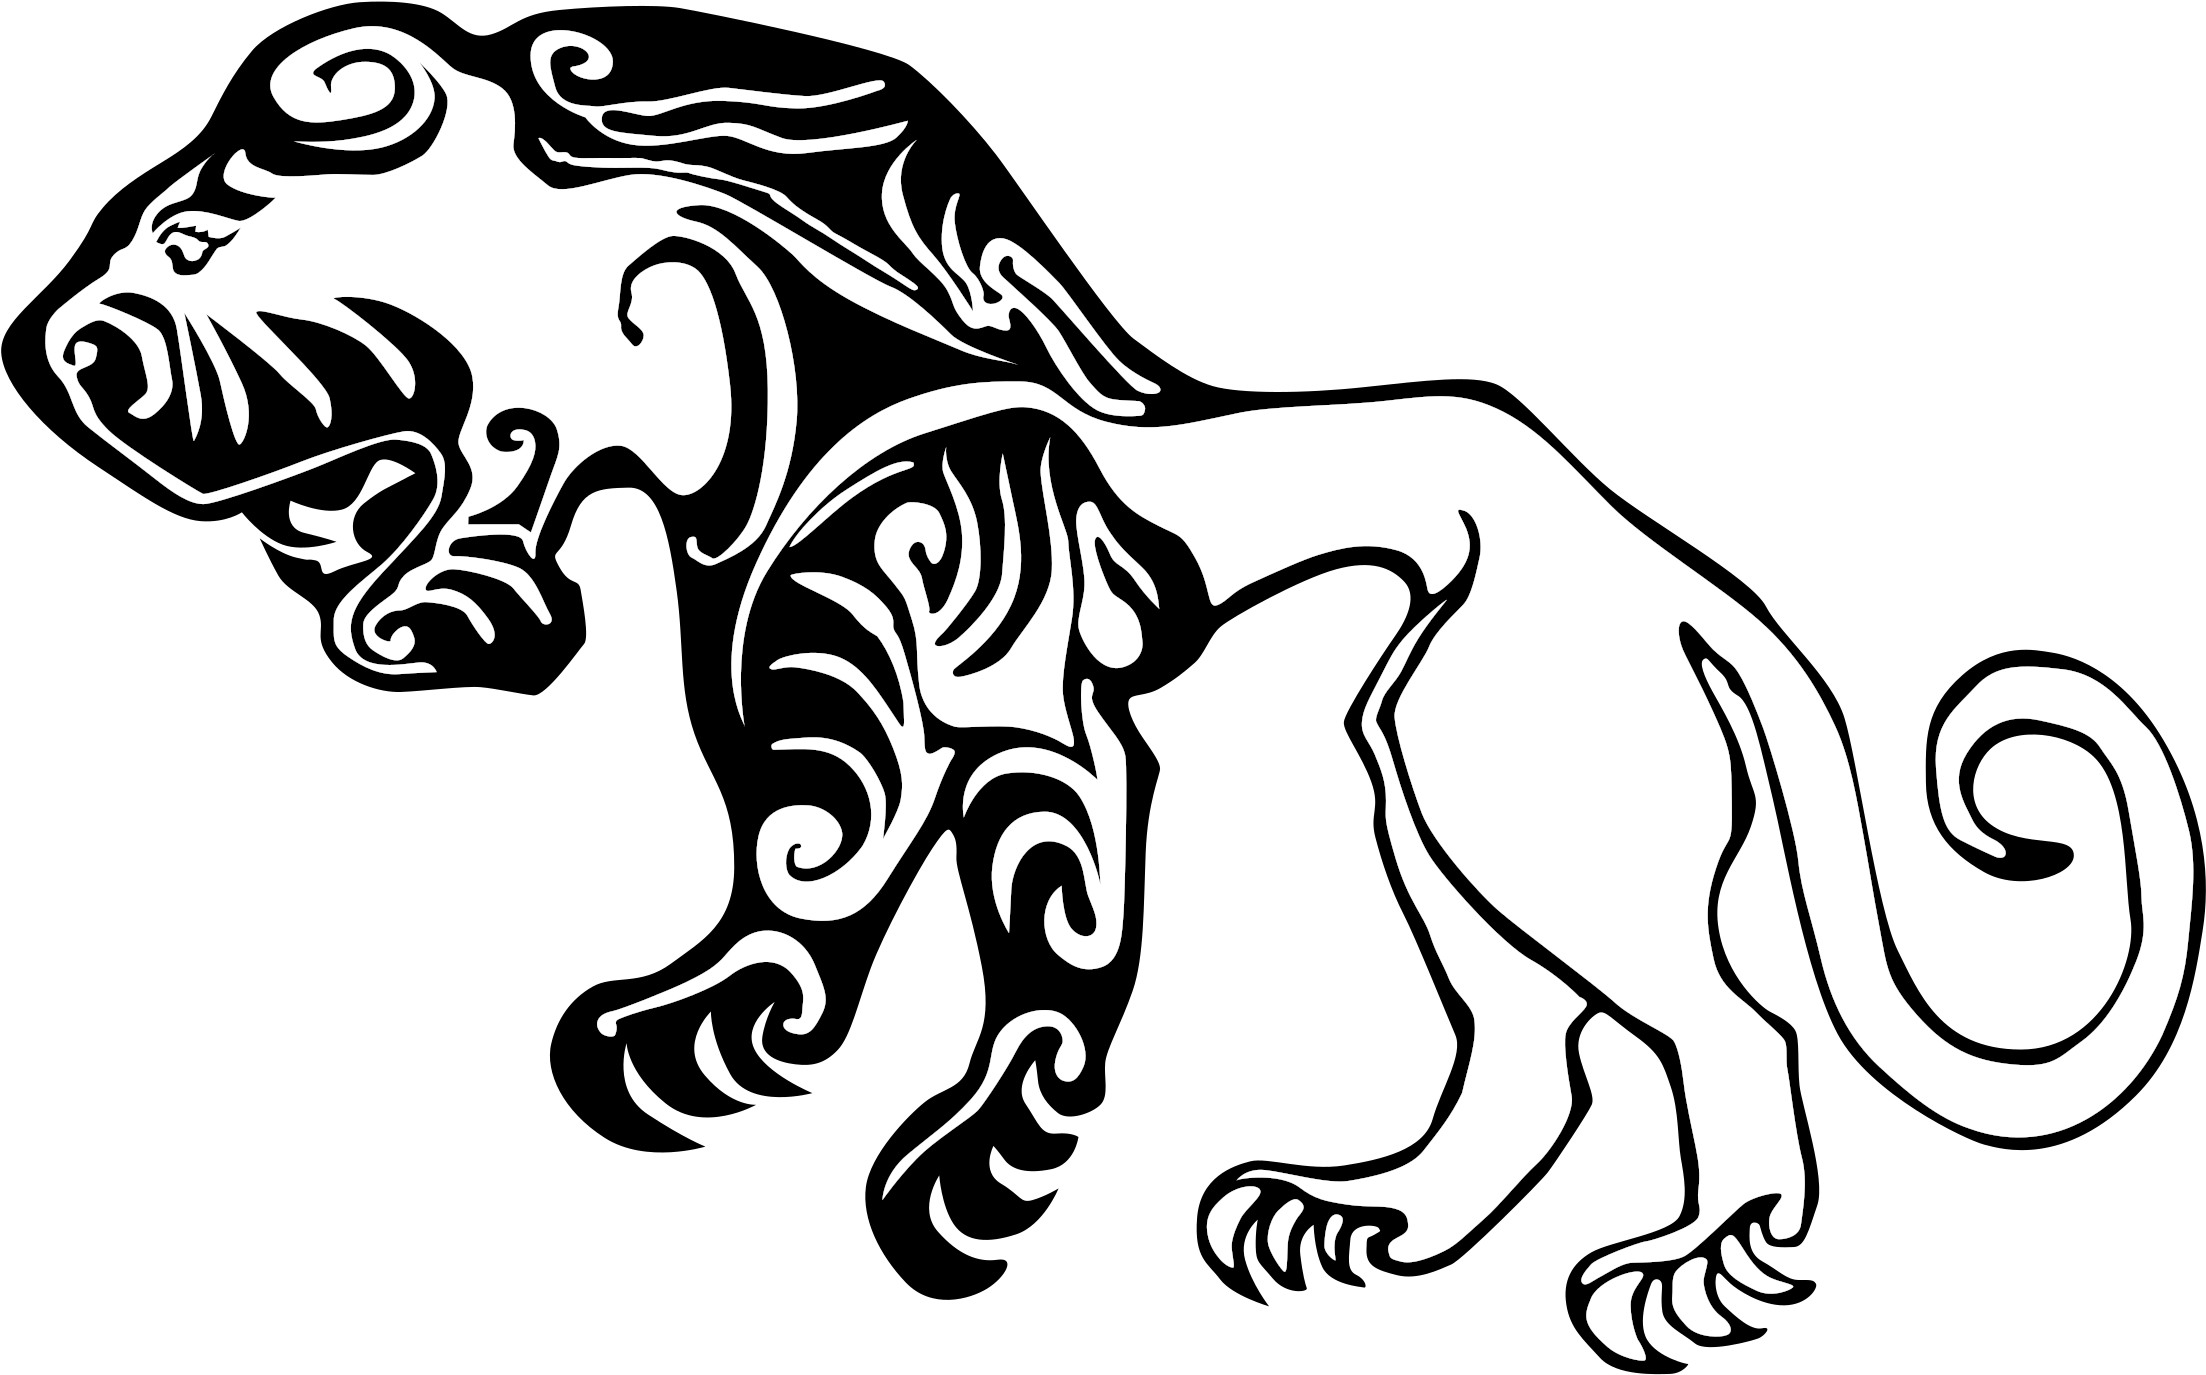 This Free Icons Png Design Of Scythian Tiger